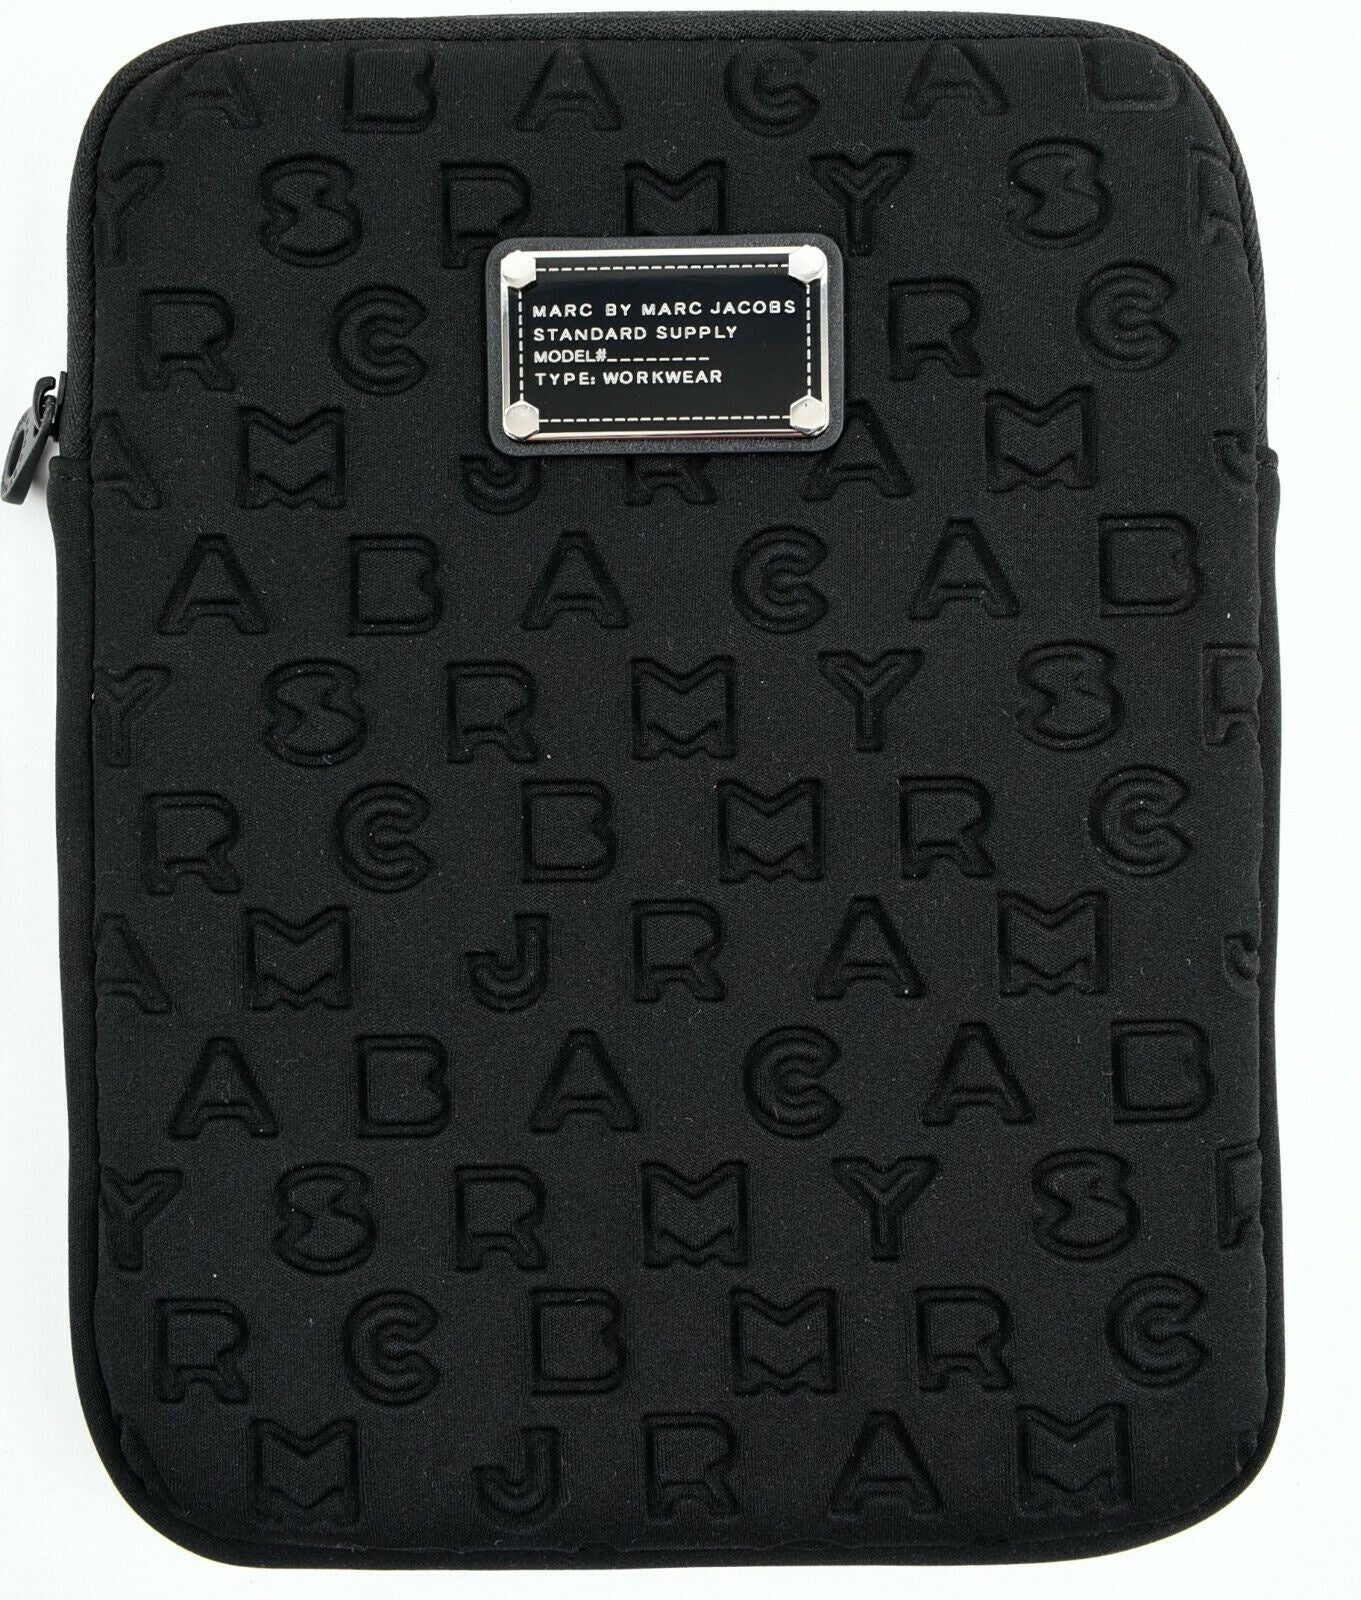 MARC by MARC JACOBS Zip Around Padded iPad Tablet Case, Black